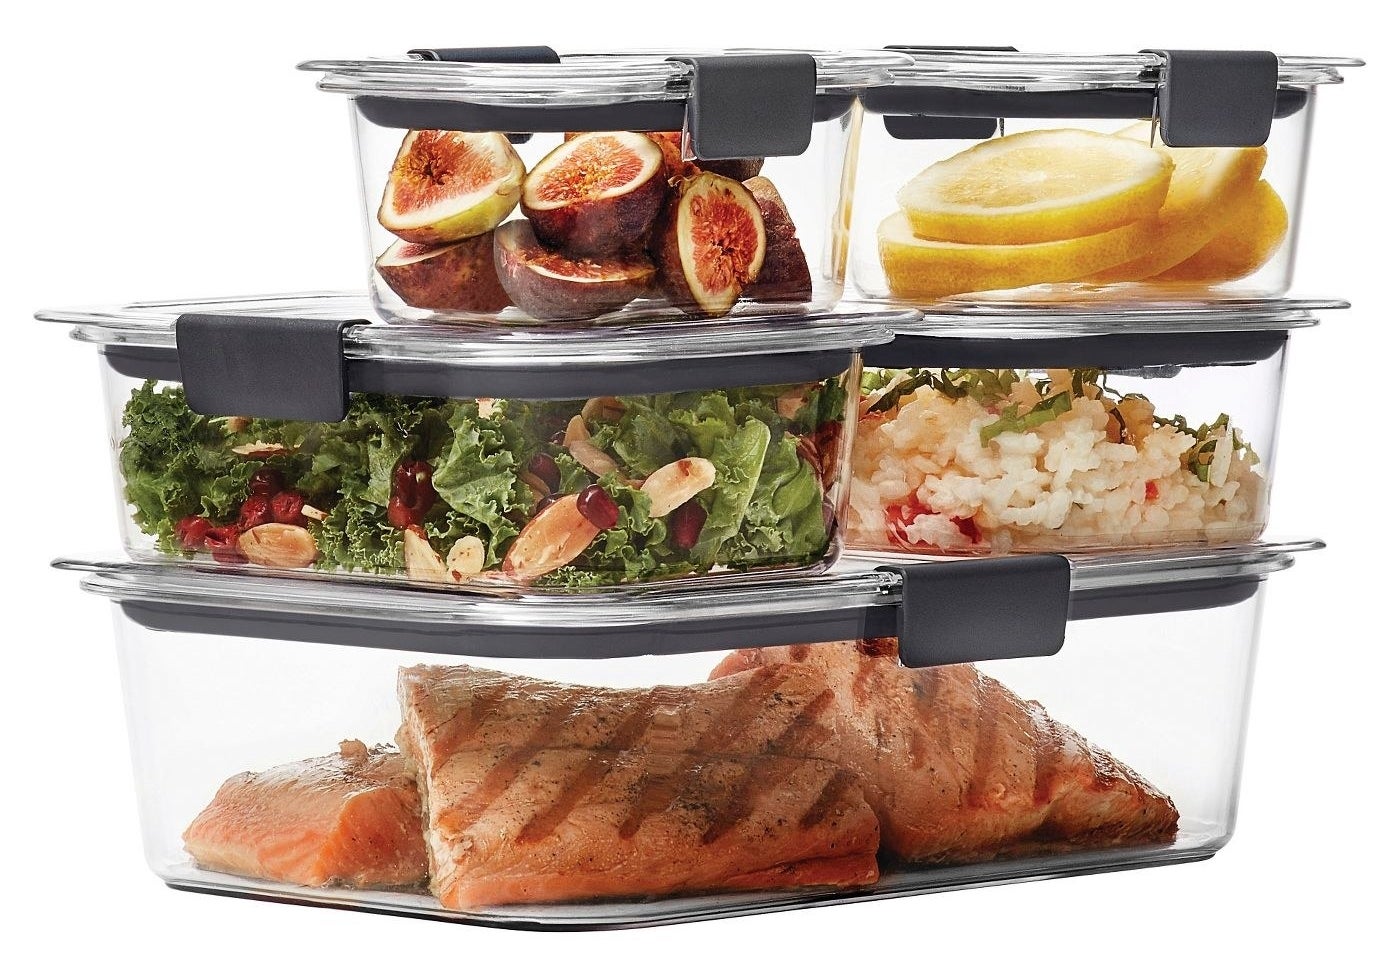 A 10-piece set of dishware with food in it 